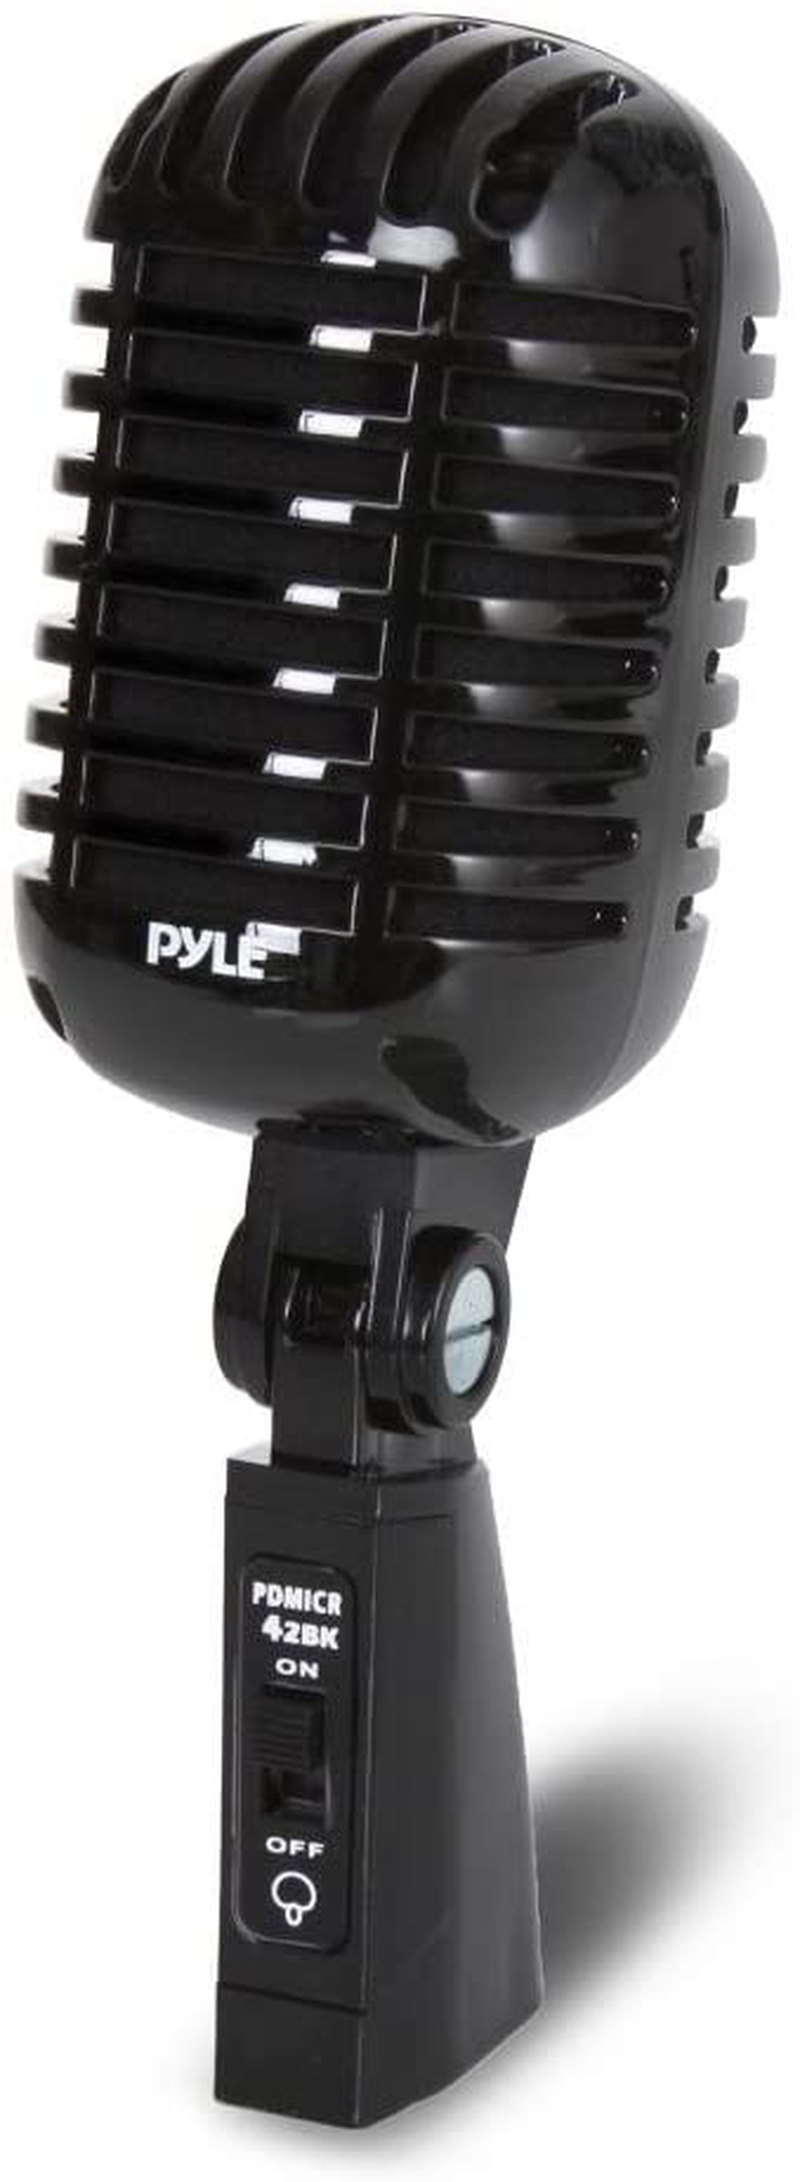 Classic Retro Dynamic Vocal Microphone - Old Vintage Style Unidirectional Cardioid Mic with XLR Cable - Universal Stand Compatible - Live Performance In Studio Recording - Pyle PDMICR42SL (Silver)